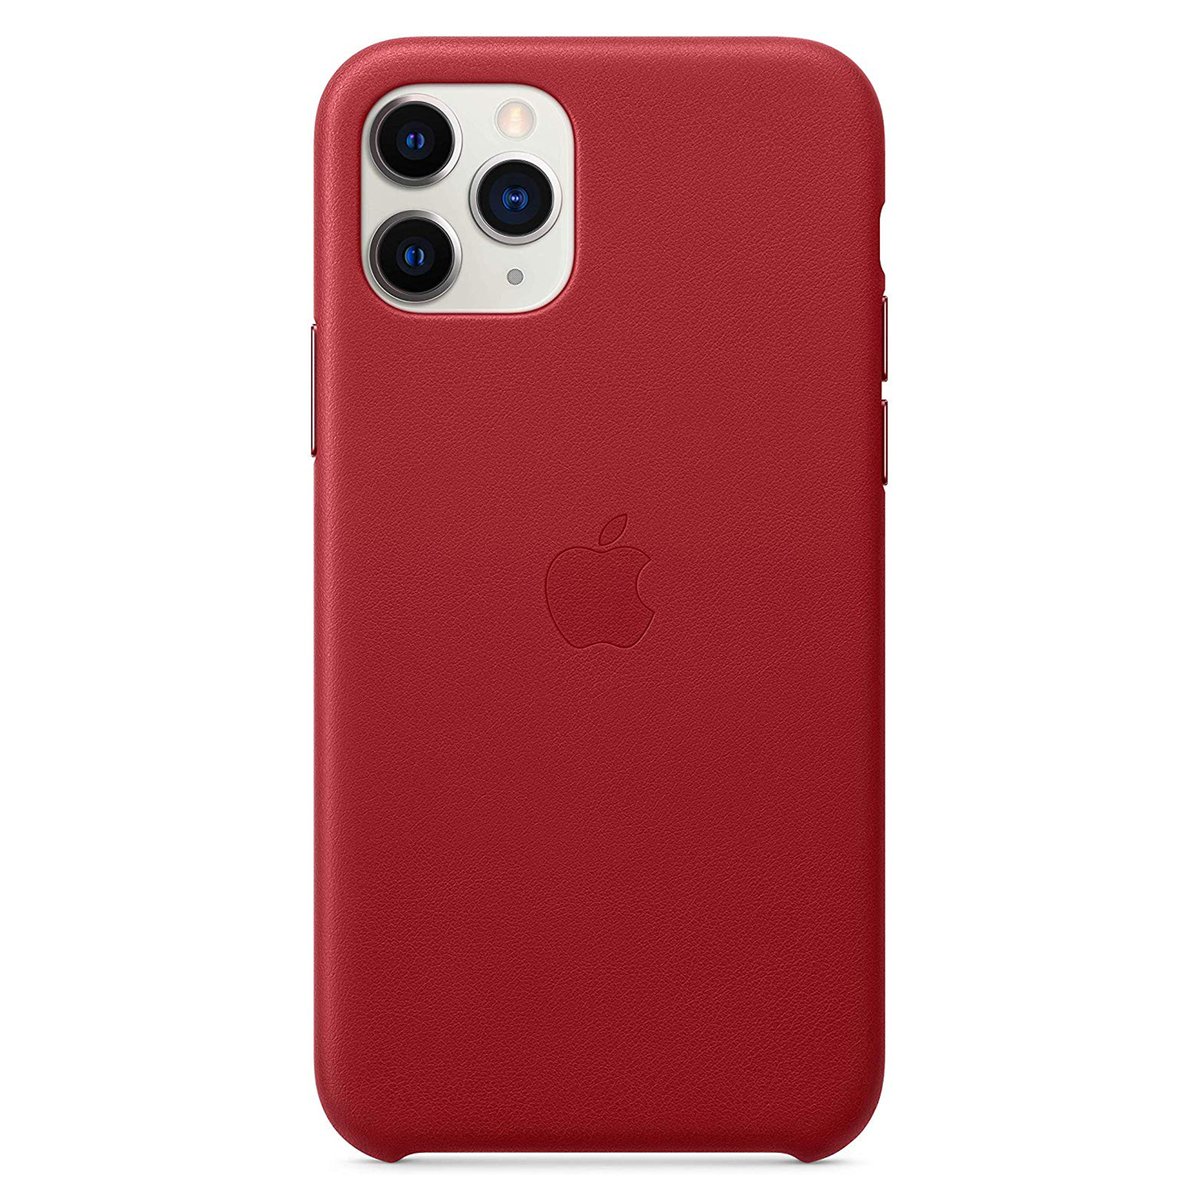 iPhone 11 Pro Leather Case MWYF2ZM Red